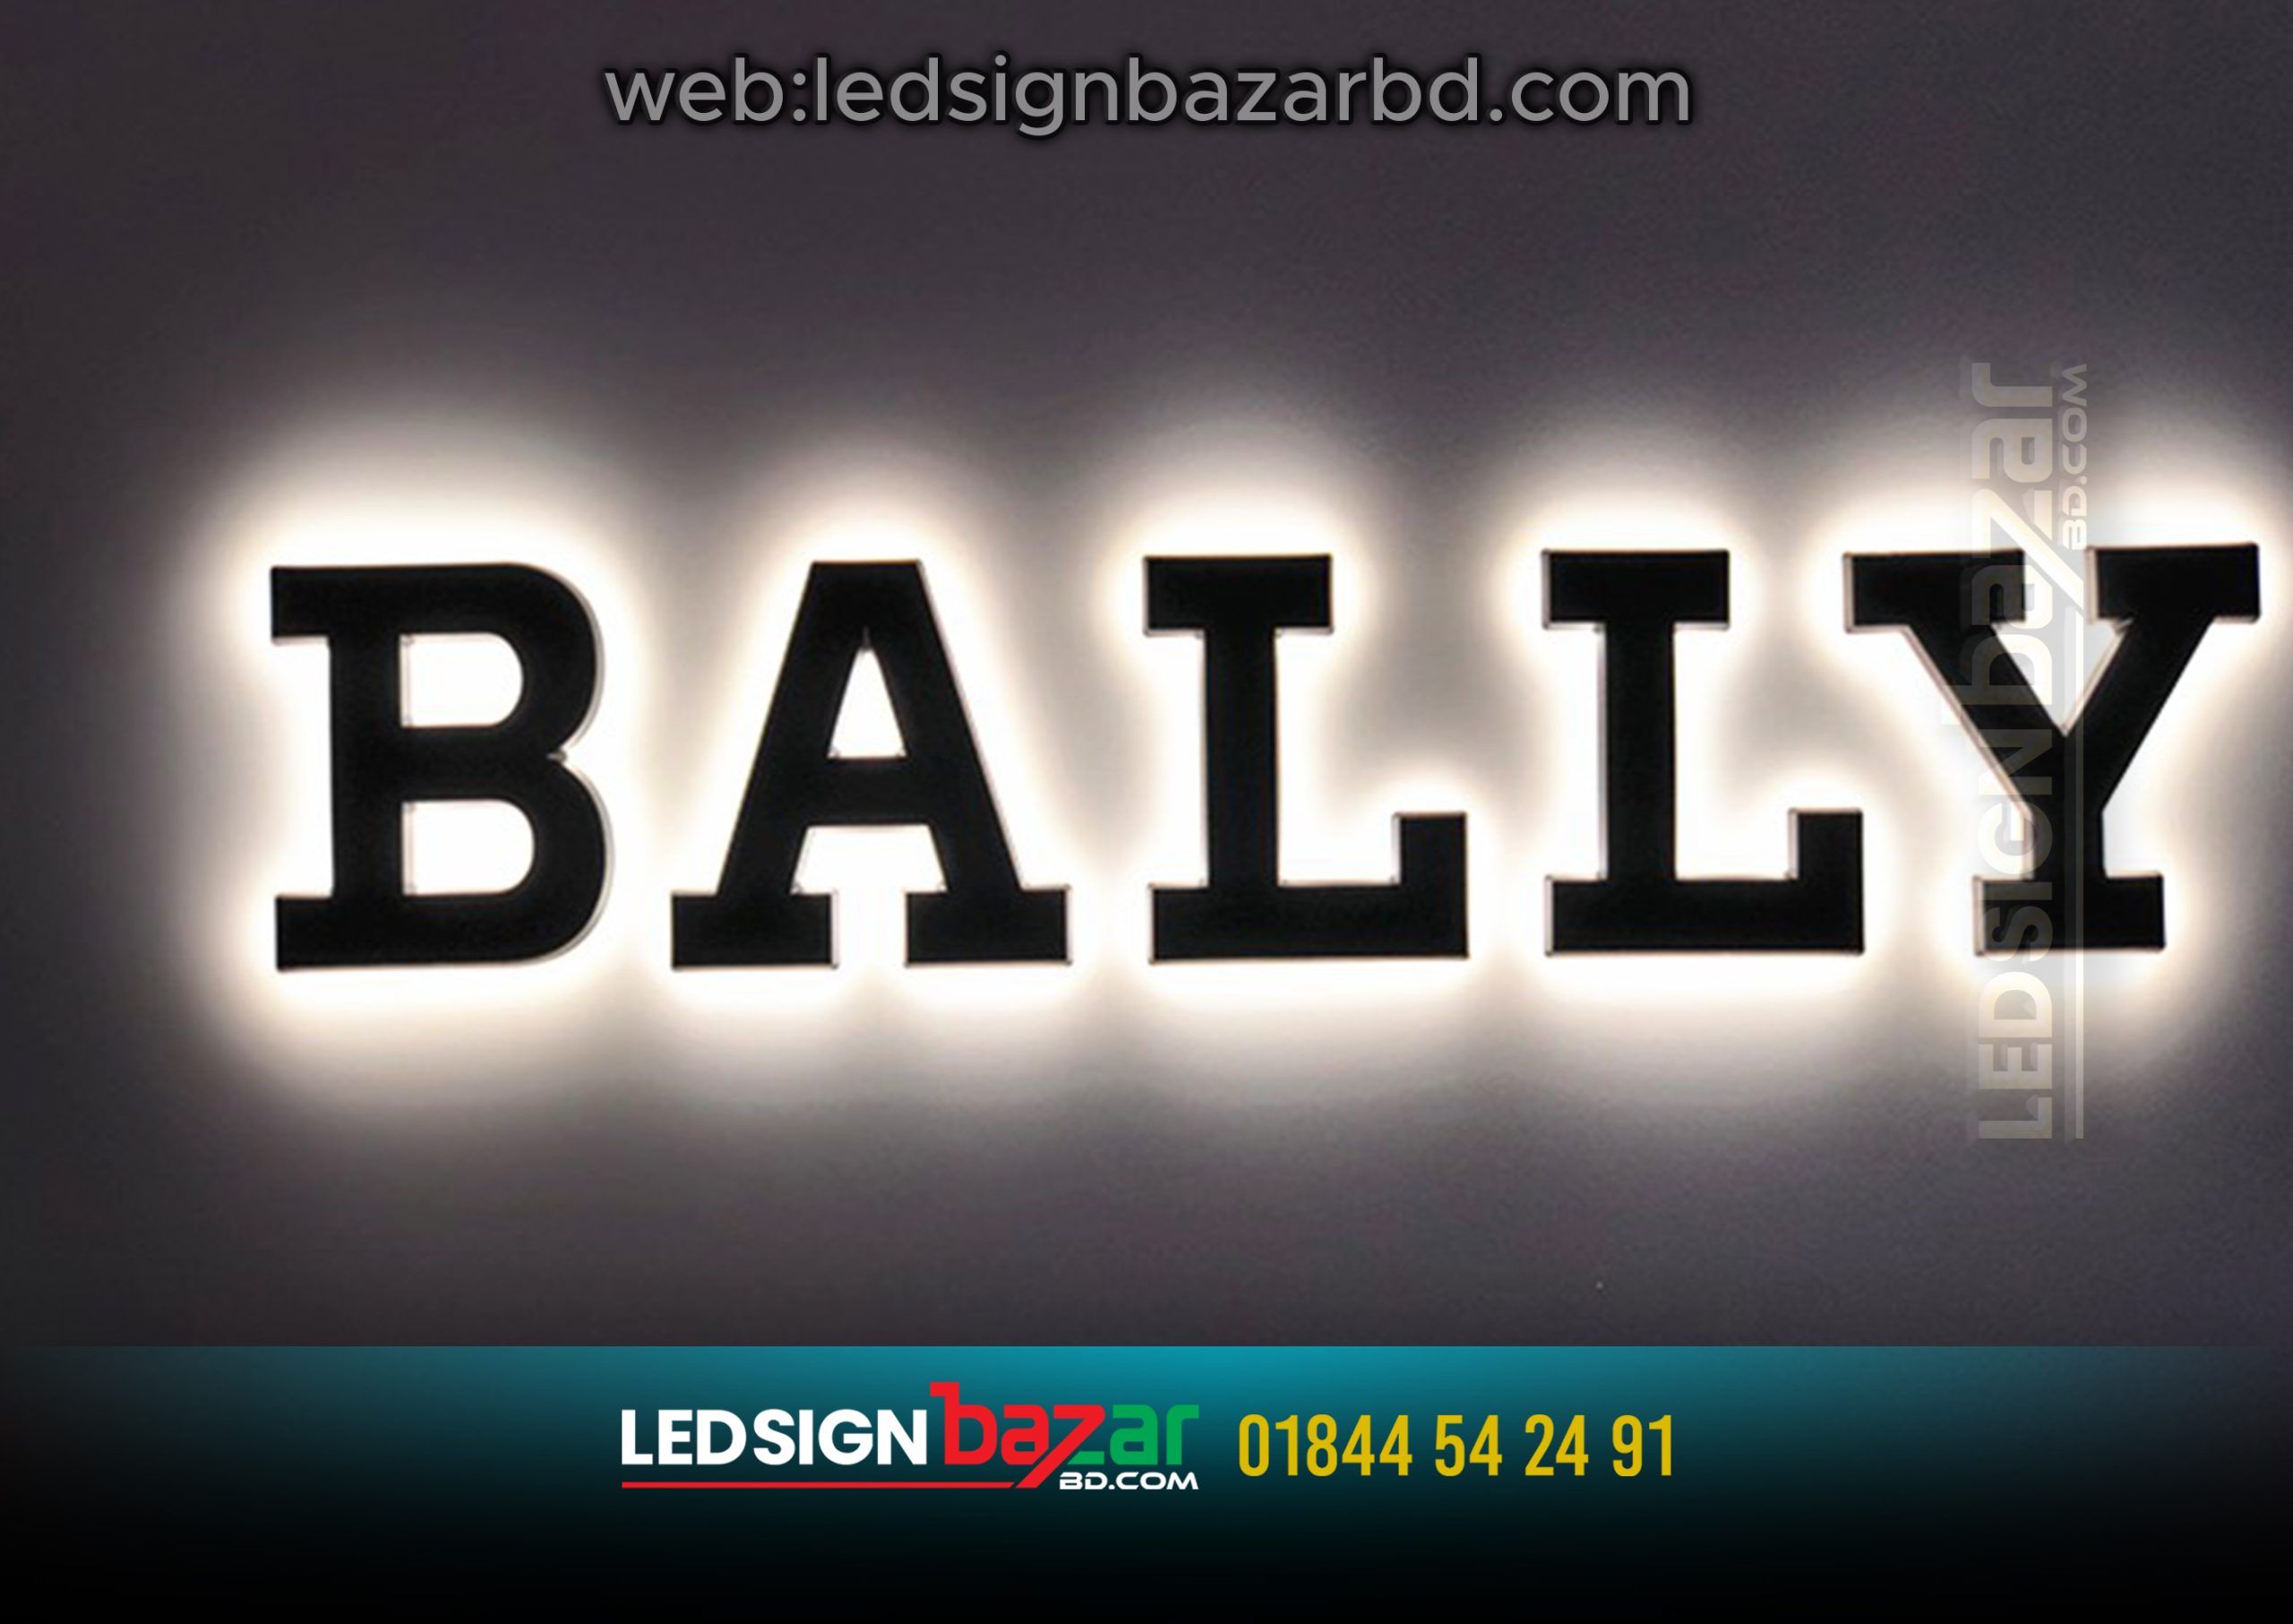 BALLY ACRYLIC LIGHTING LETTER SIGNAGE BD, LETTER SIGNBOARD FACTORY BD.